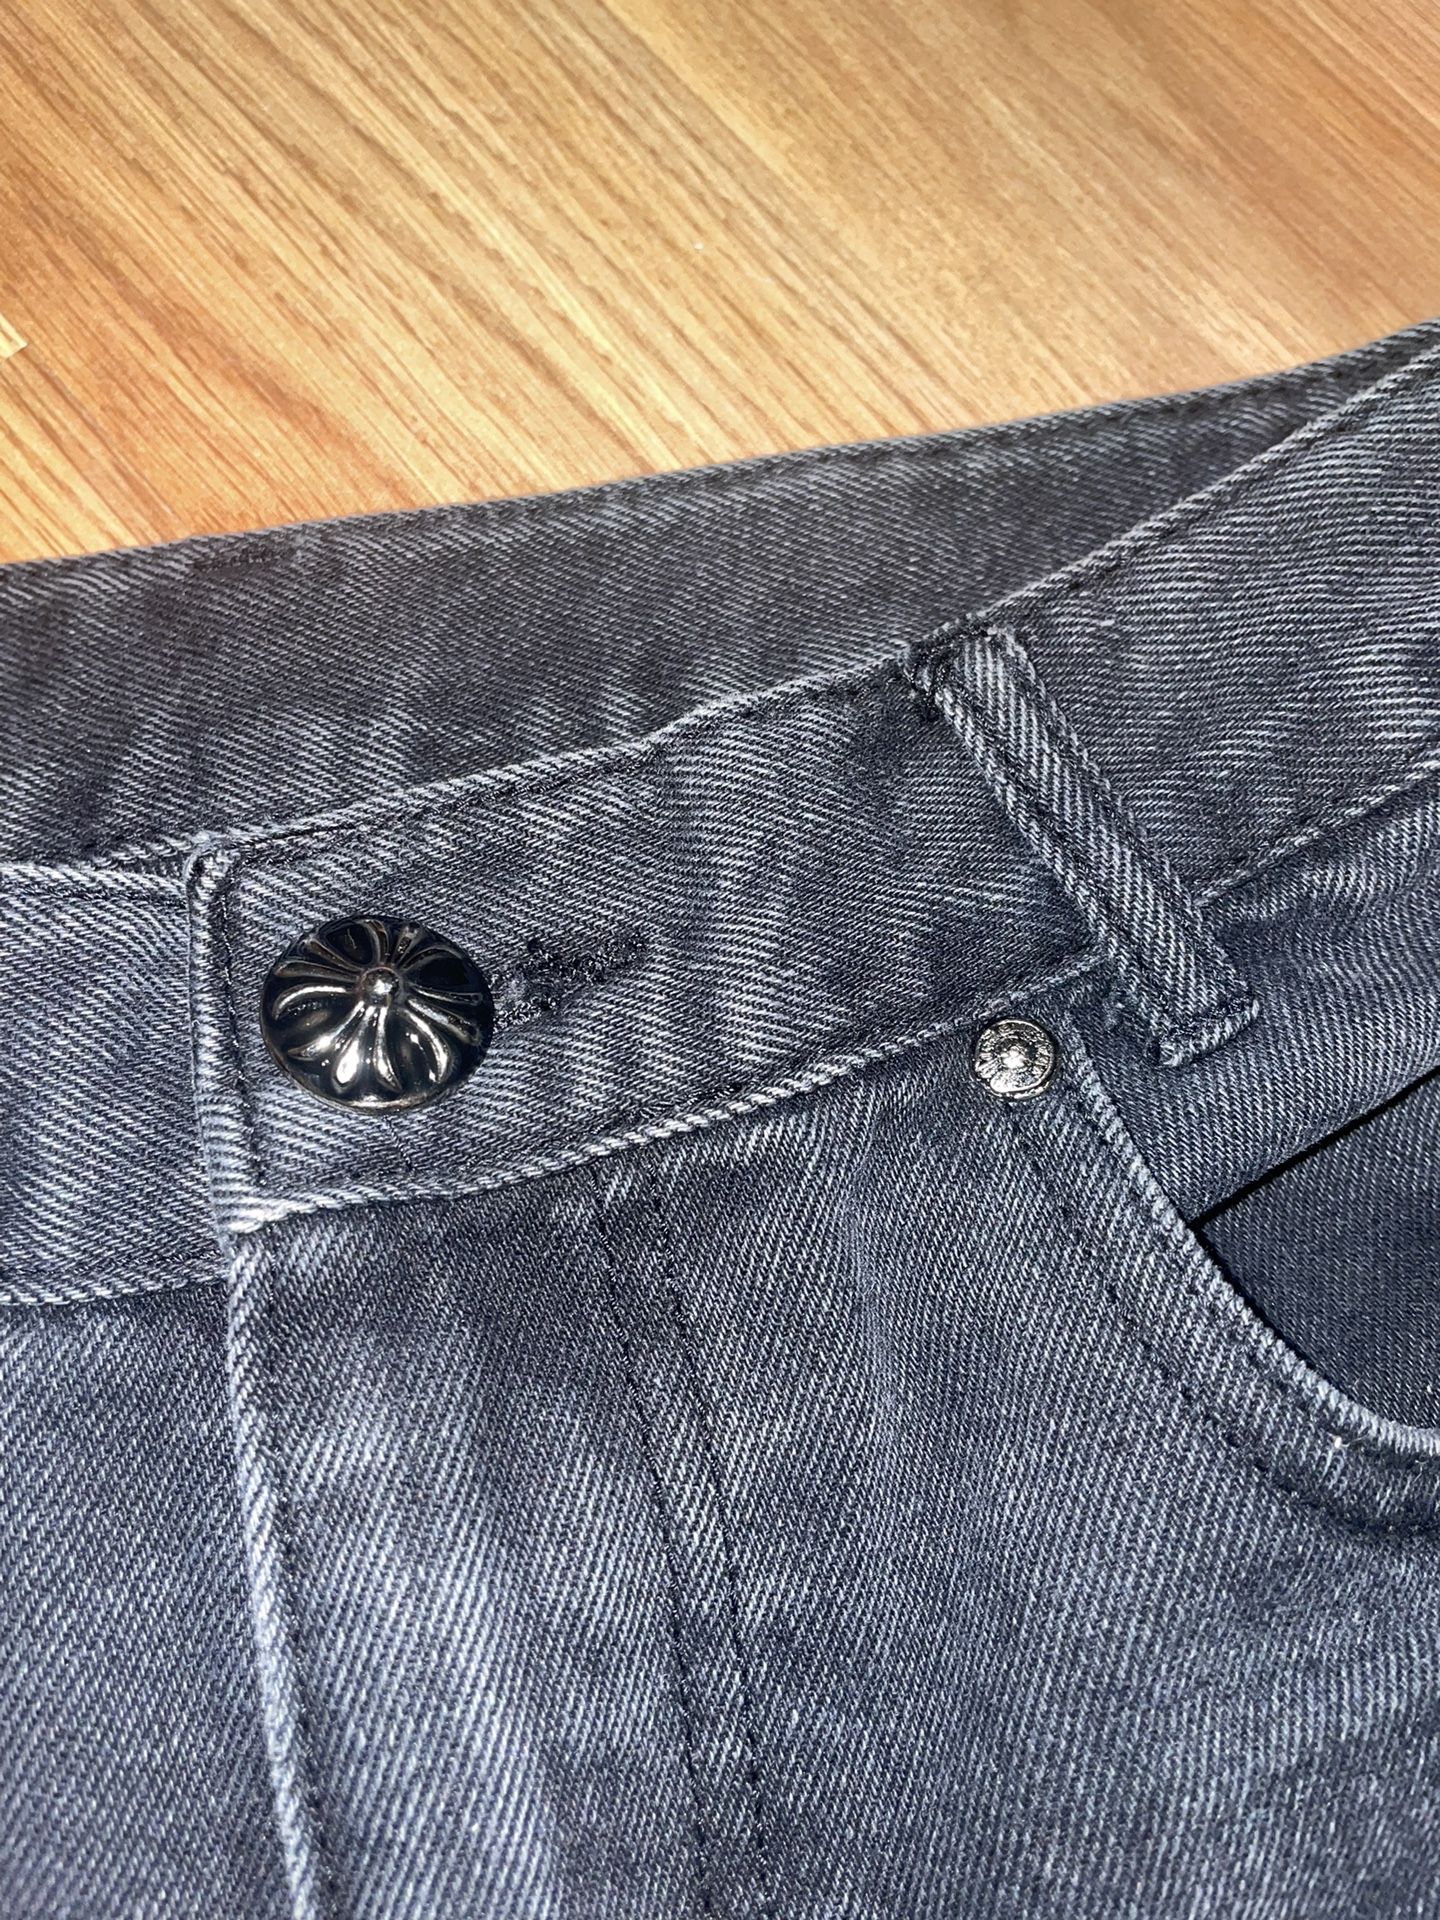 Chrome Hearts Levi Jeans for Sale in Pompano Beach, FL - OfferUp